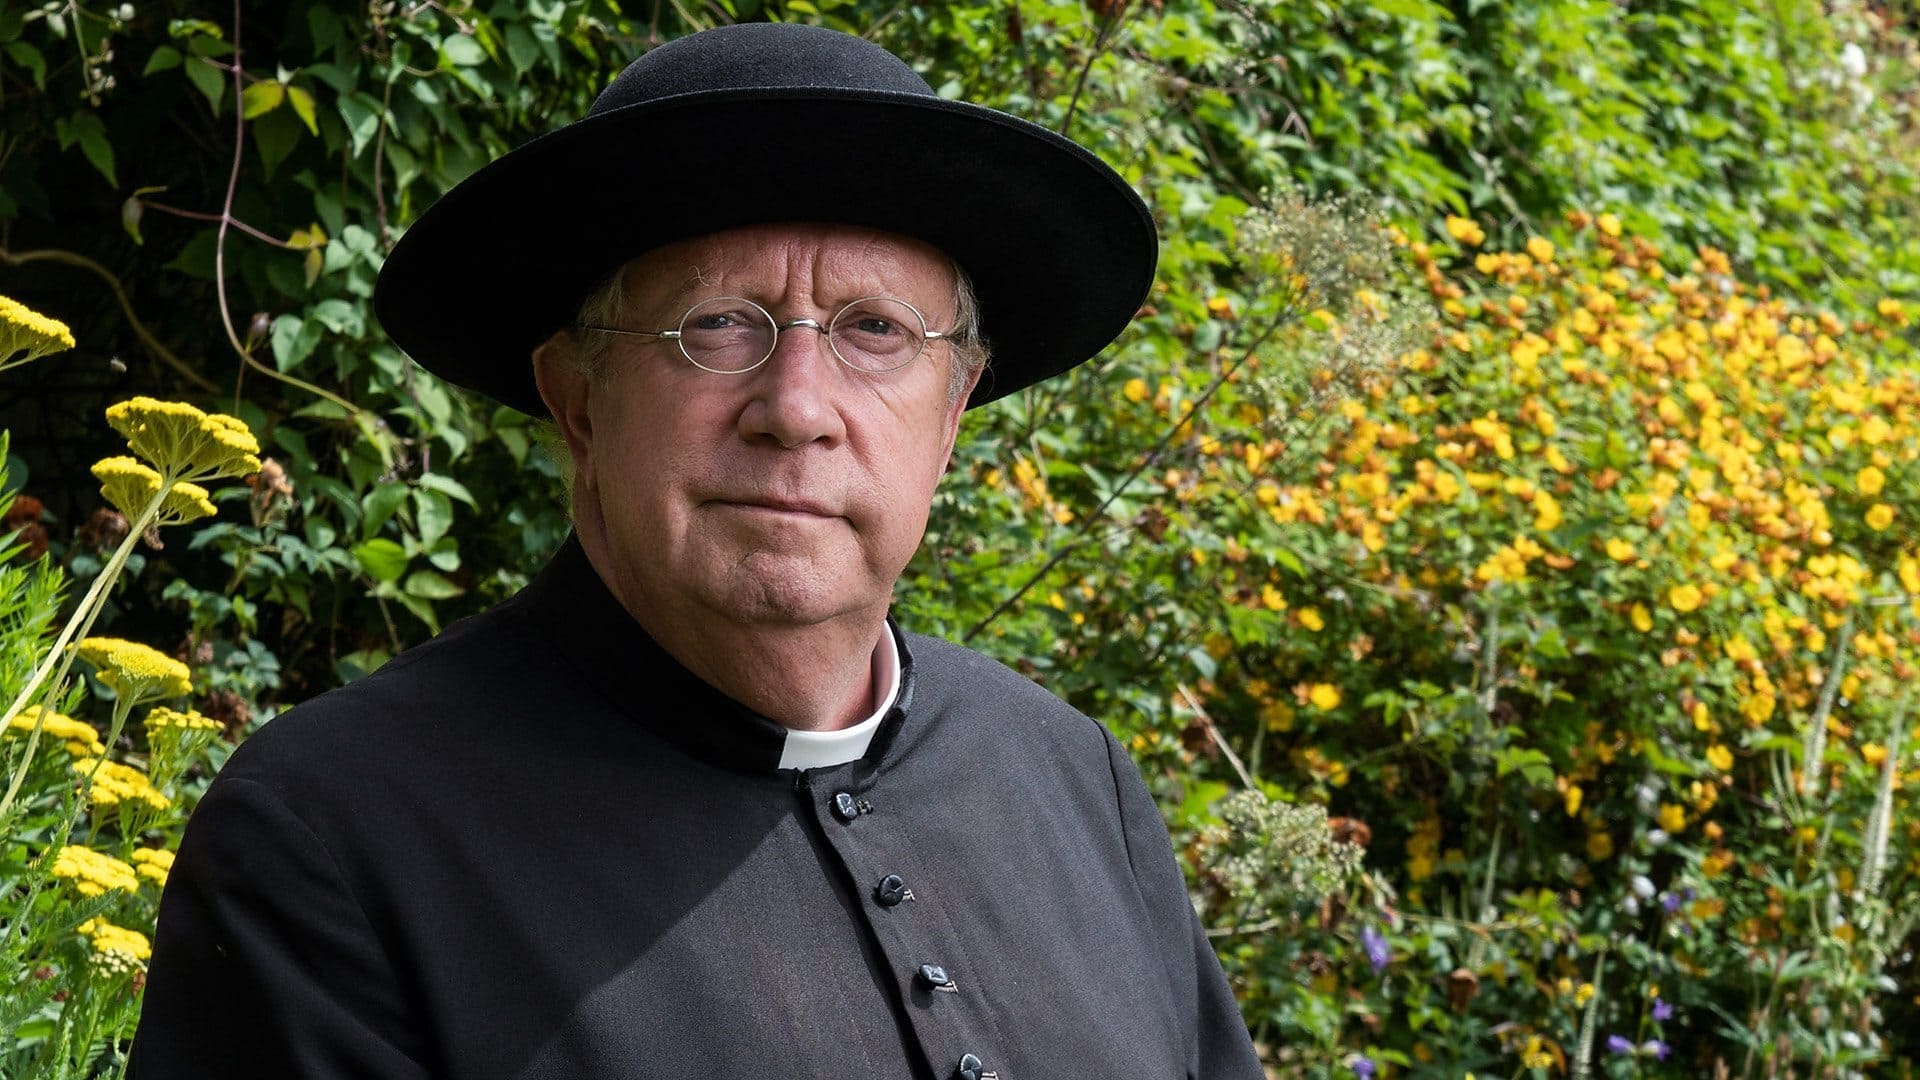 Father Brown - Series 5